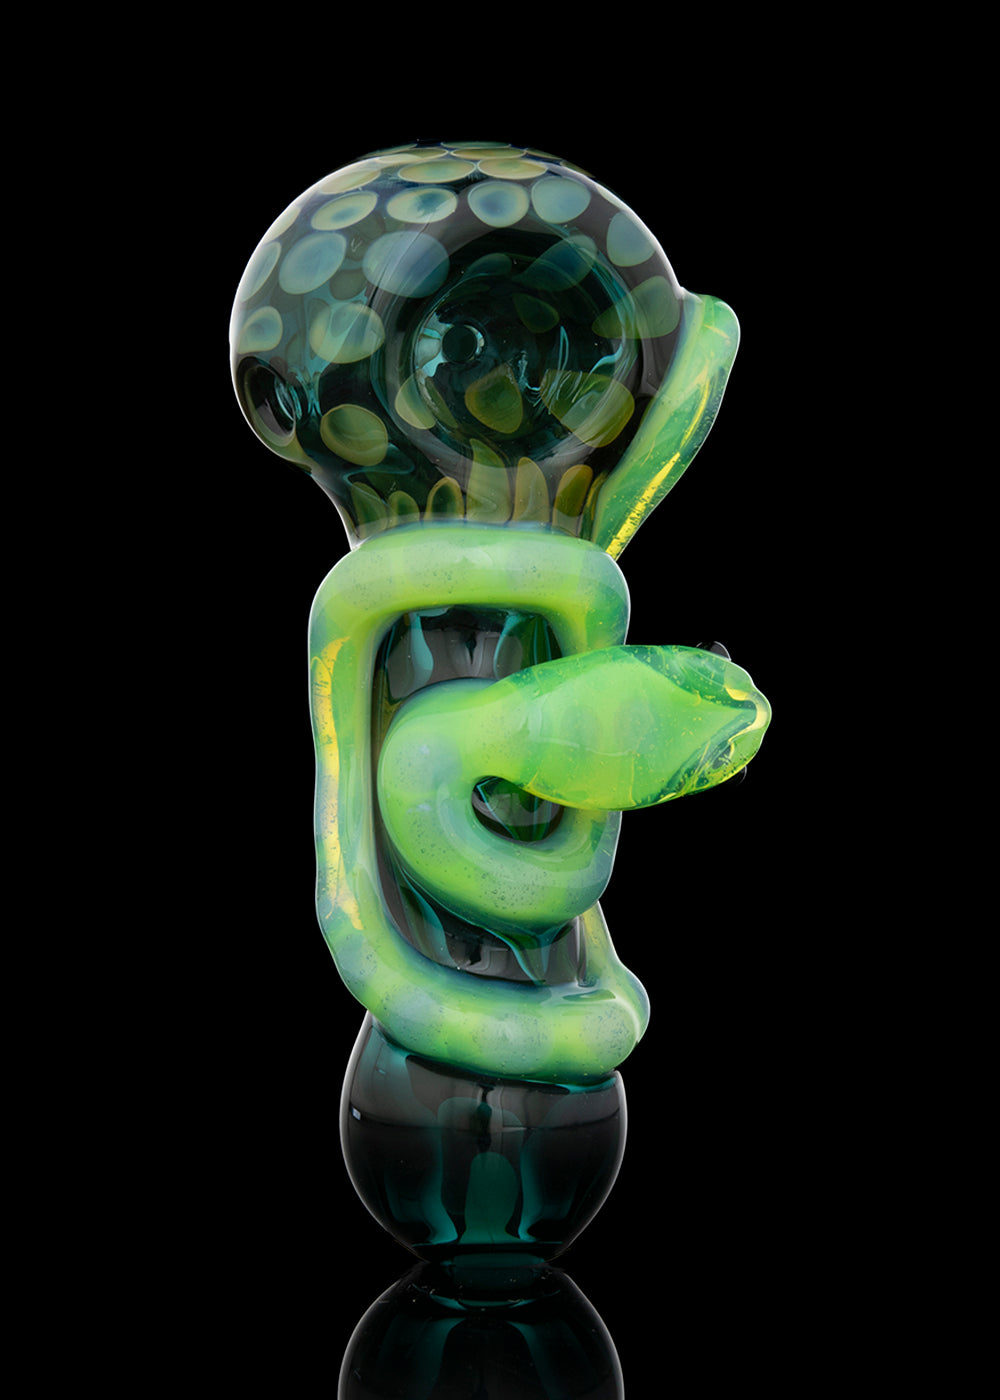 Teal Spoon with Green Slyme Snake by Curtis Claw